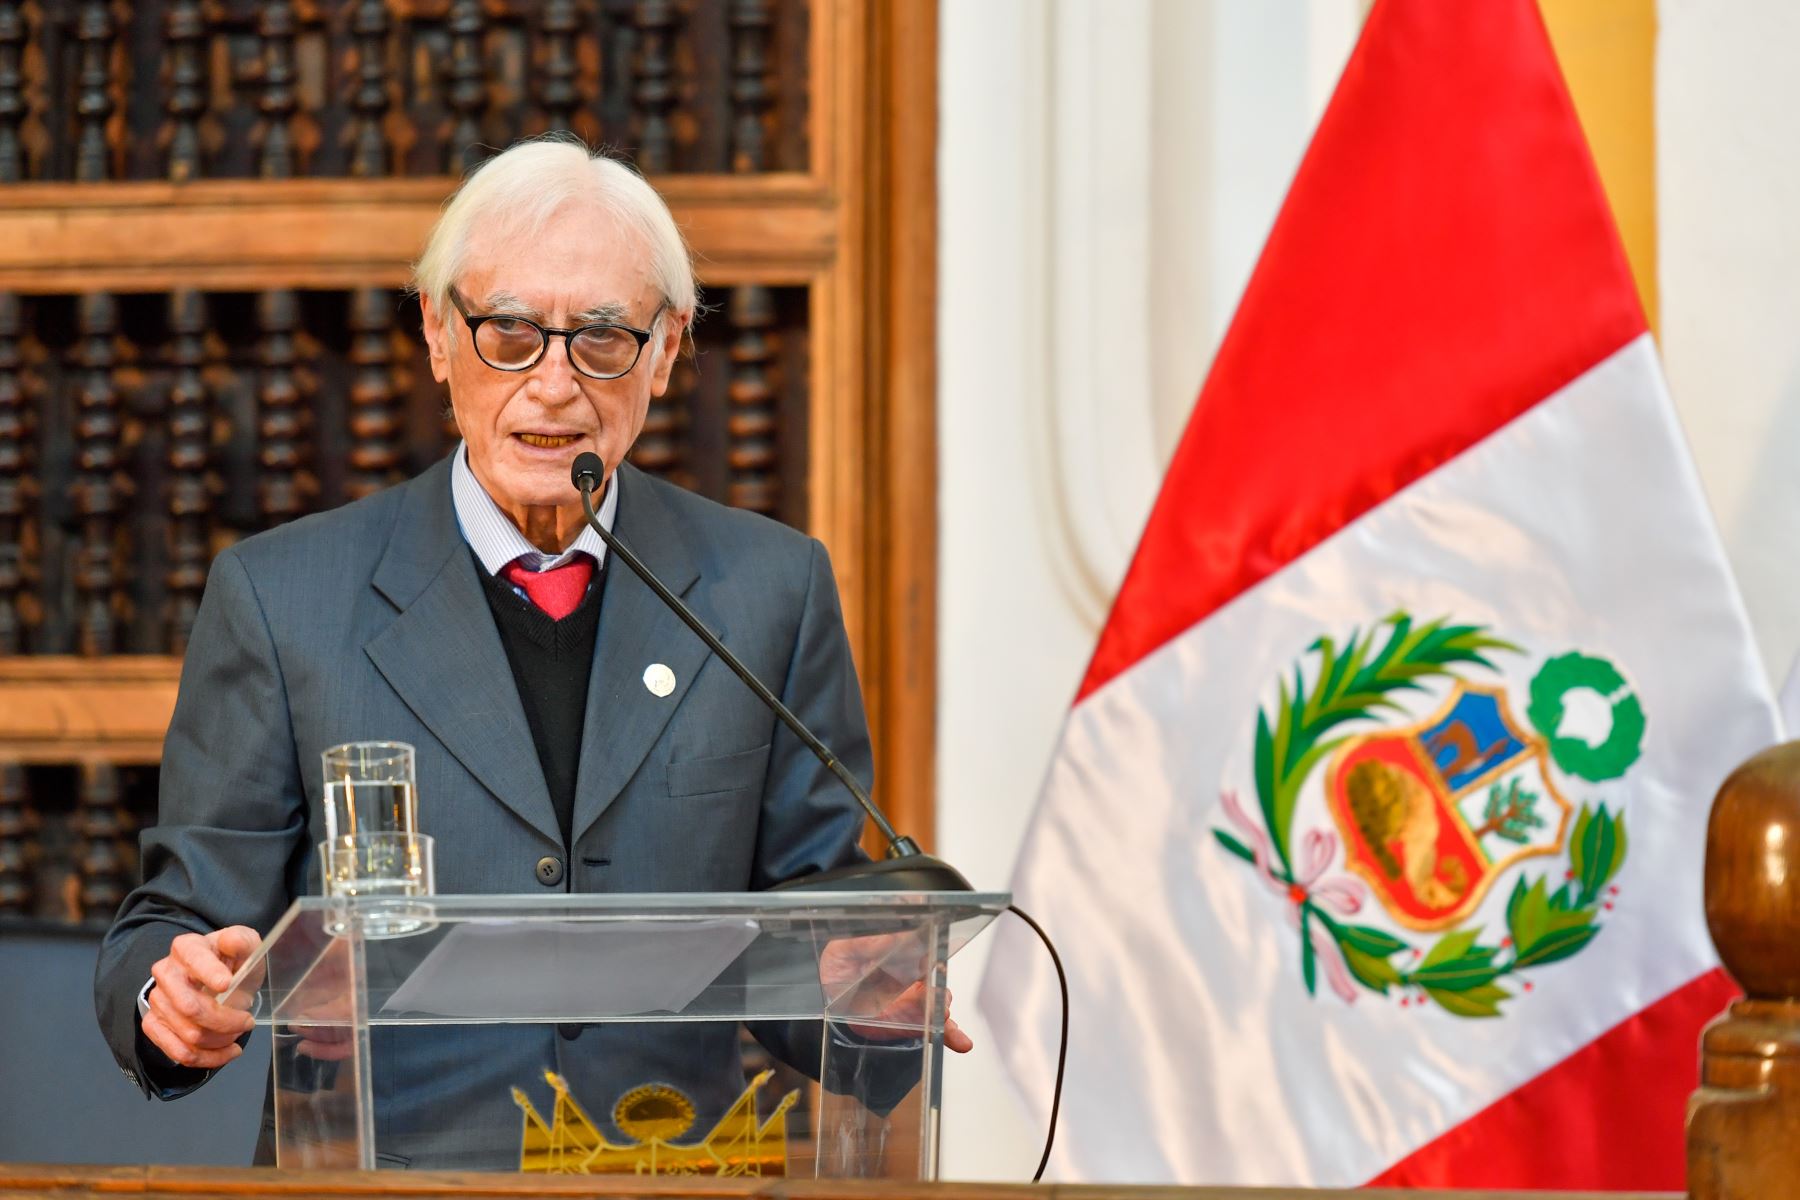 Photo: ANDINA/Ministry of Foreign Affairs of Peru